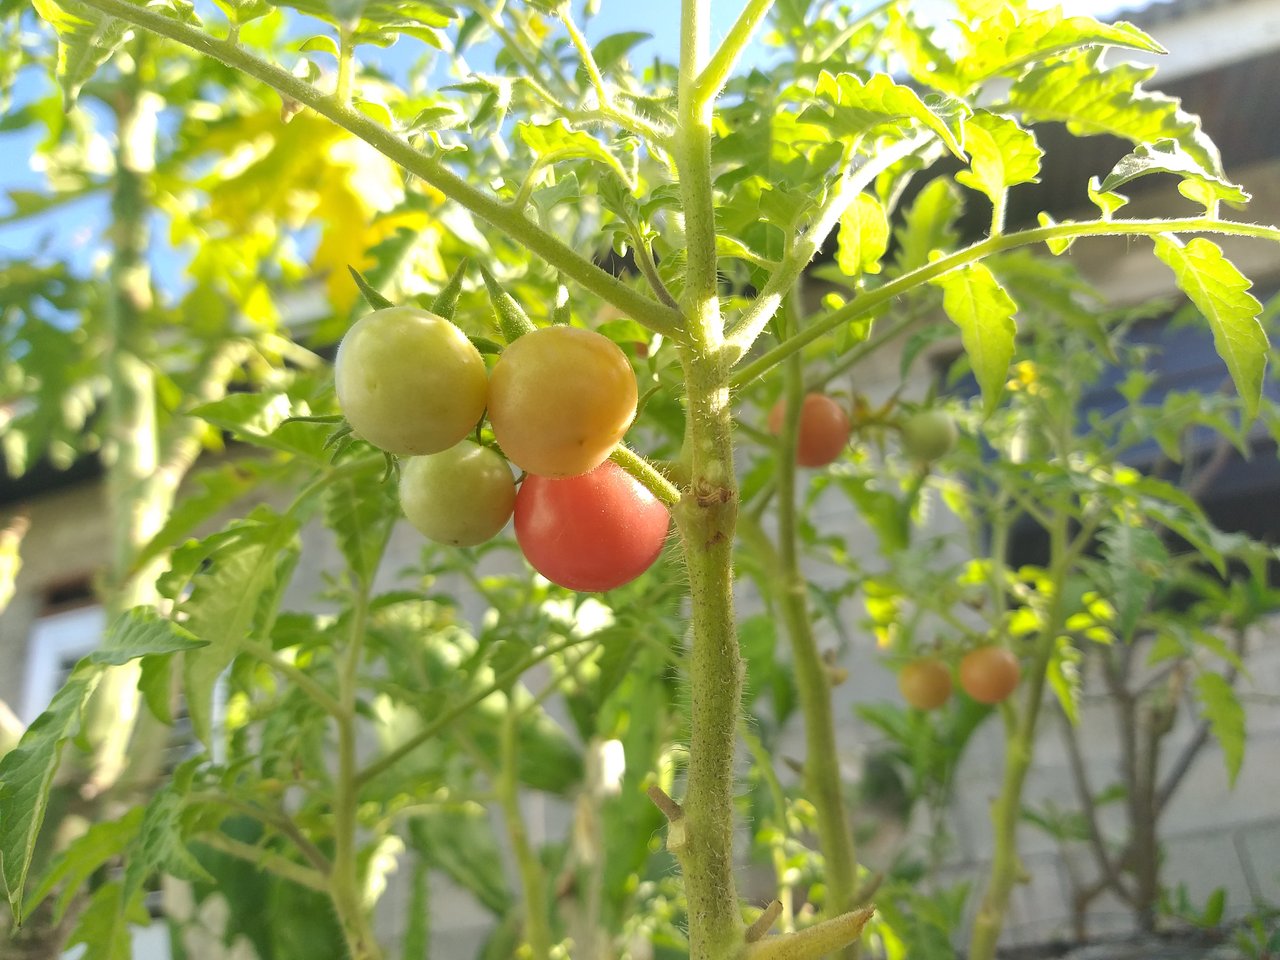 A bunch of turning ripe cherry tomatoes, shot from an angle